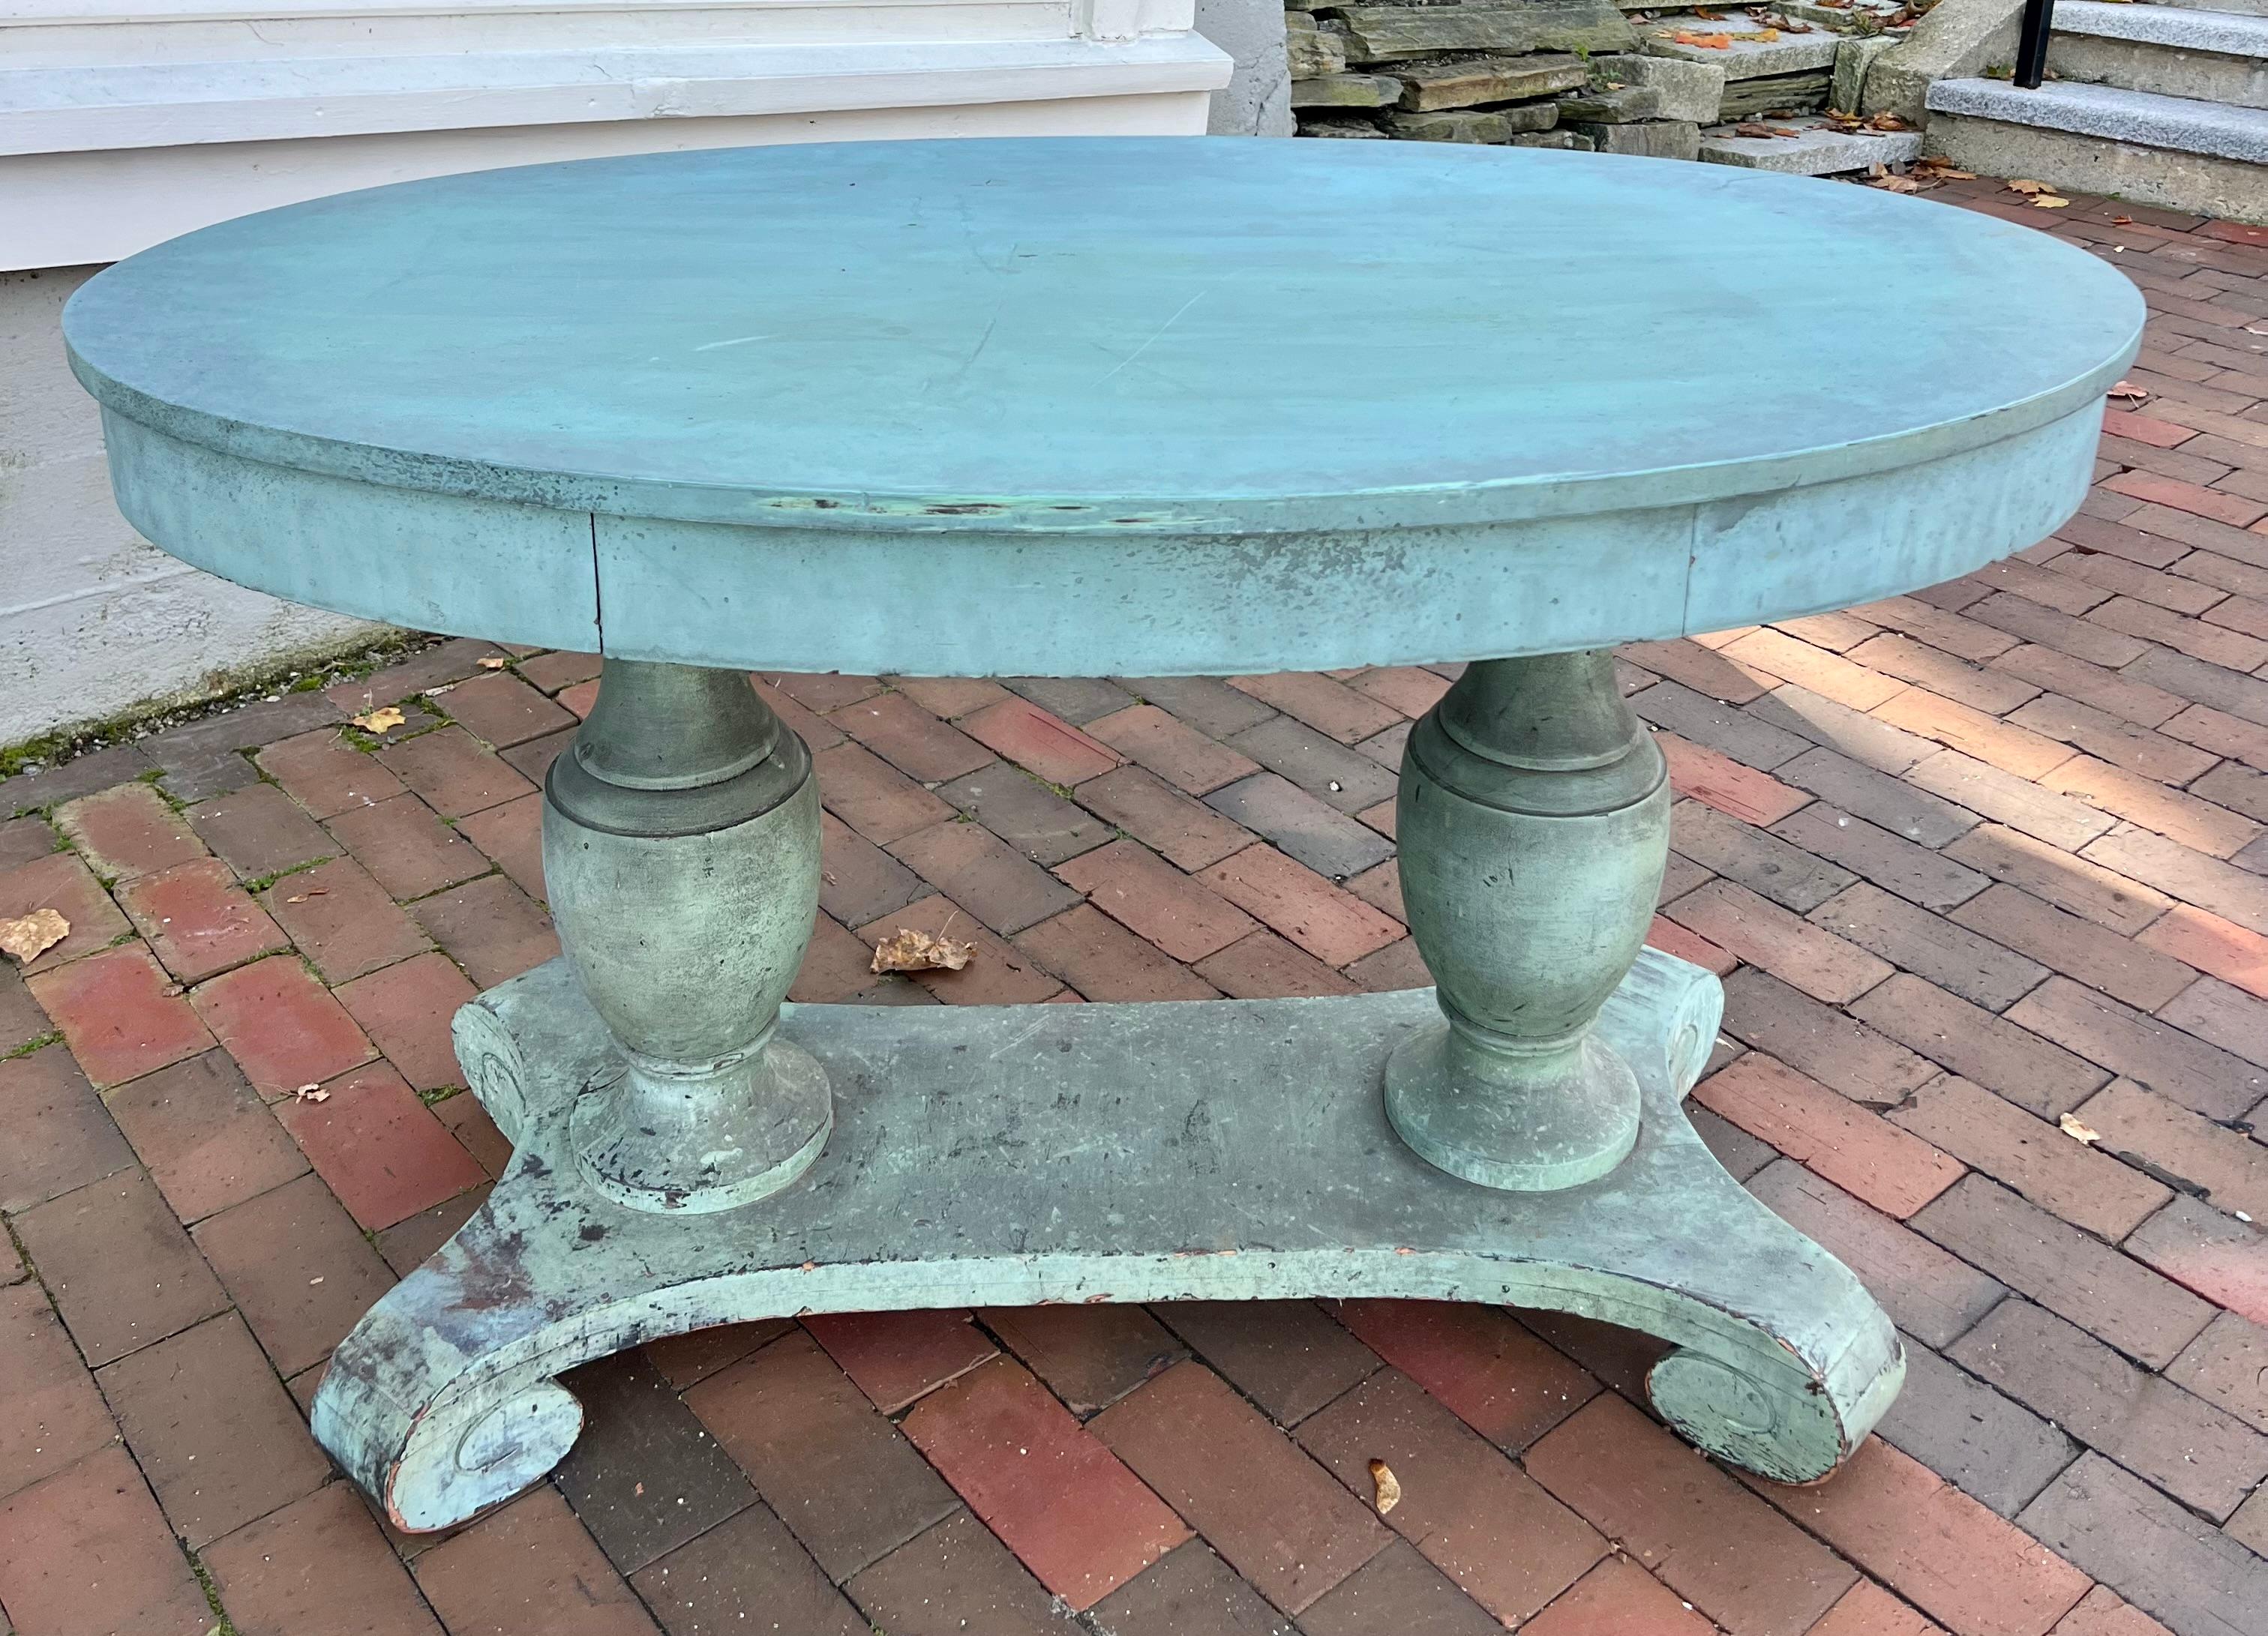 Early 19th century American table in fabulous early blue paint.  Featuring a pair of bulbous urn supports set on a stretcher base with scroll carved feet.  The color has a Swedish Gustavian feel to it and the size would allow it to be used in a